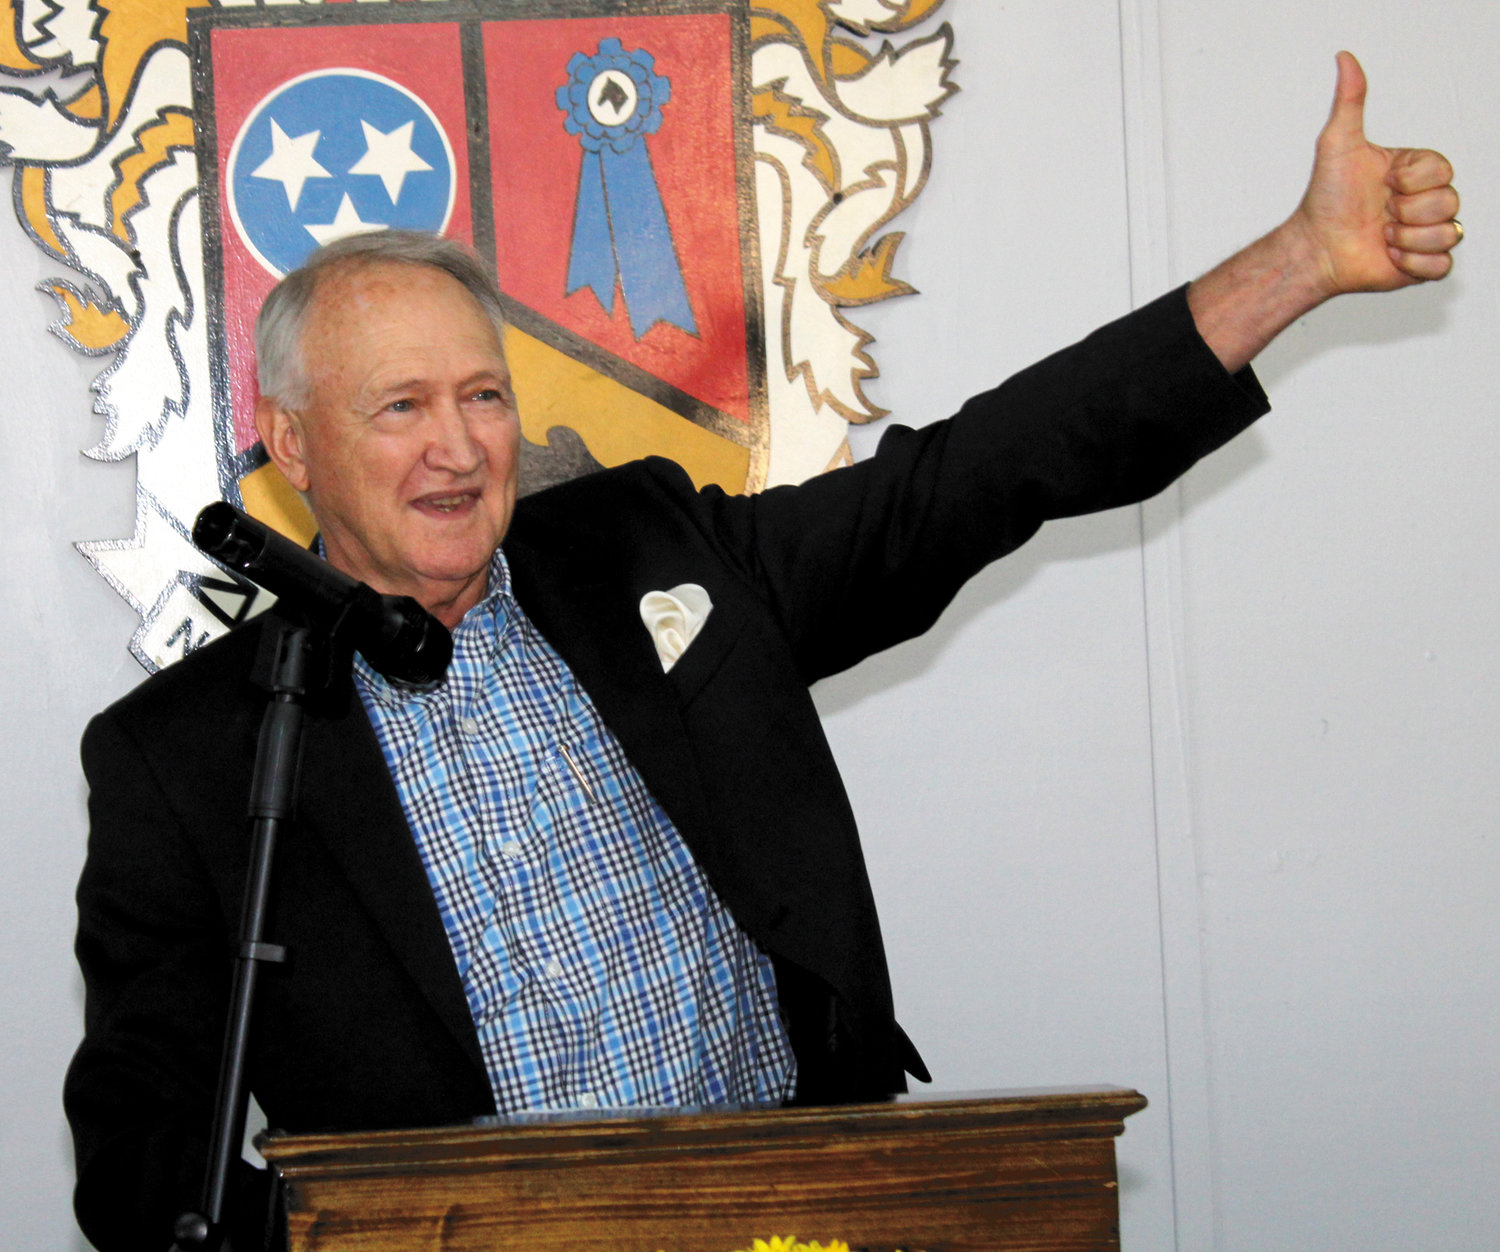 Author David Hazelwood was guest speaker during the Friends of Shelbyville-Bedford County Public Library luncheon on Tuesday at Blue Ribbon Circle. He is a prolific writer, really beginning his publishing journey late in life. In 2009, he published, “Cortner Mill Cookbook.”